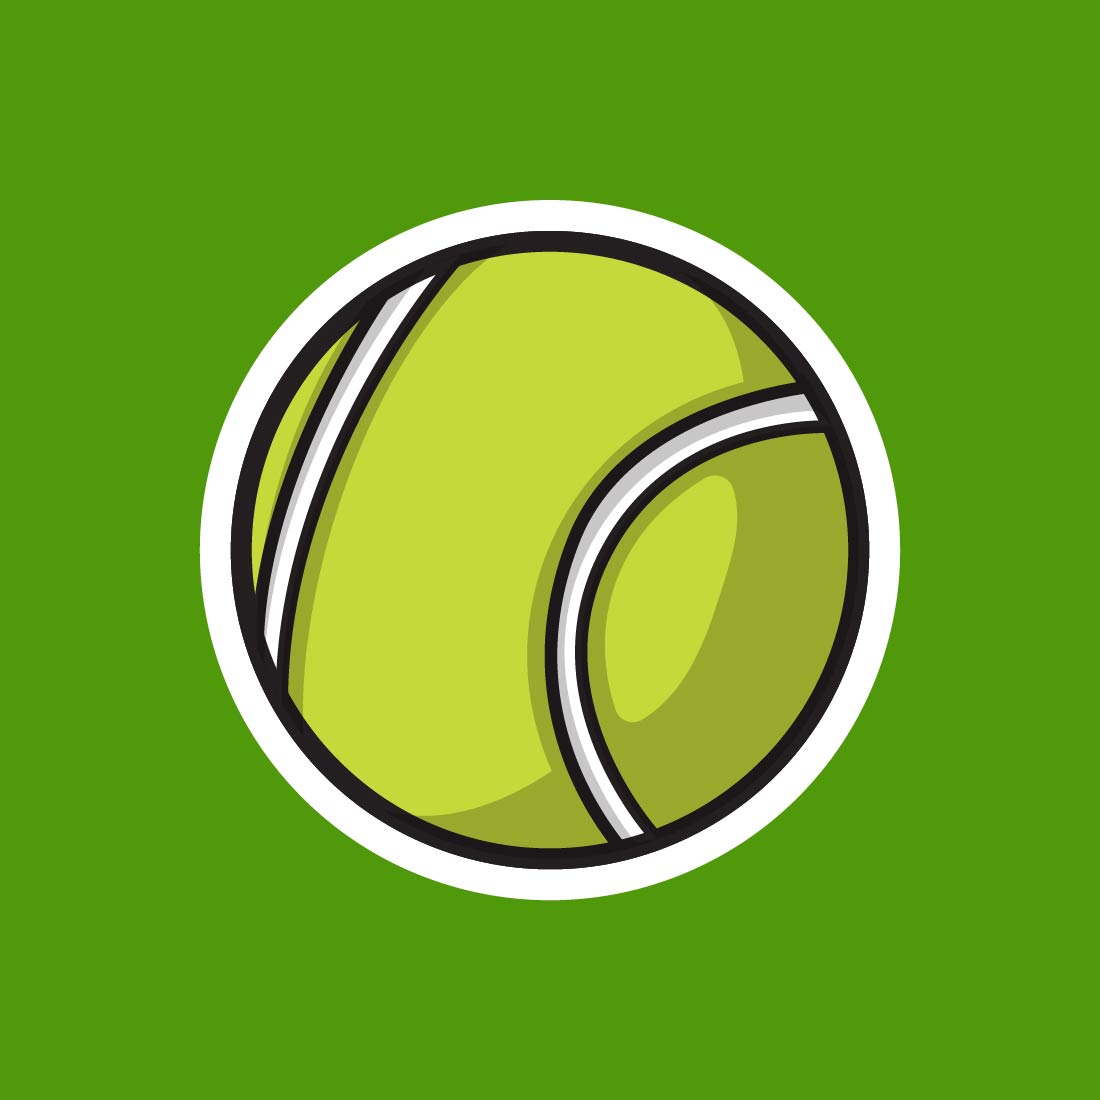 Illustration vector graphic of tennis professional ball.